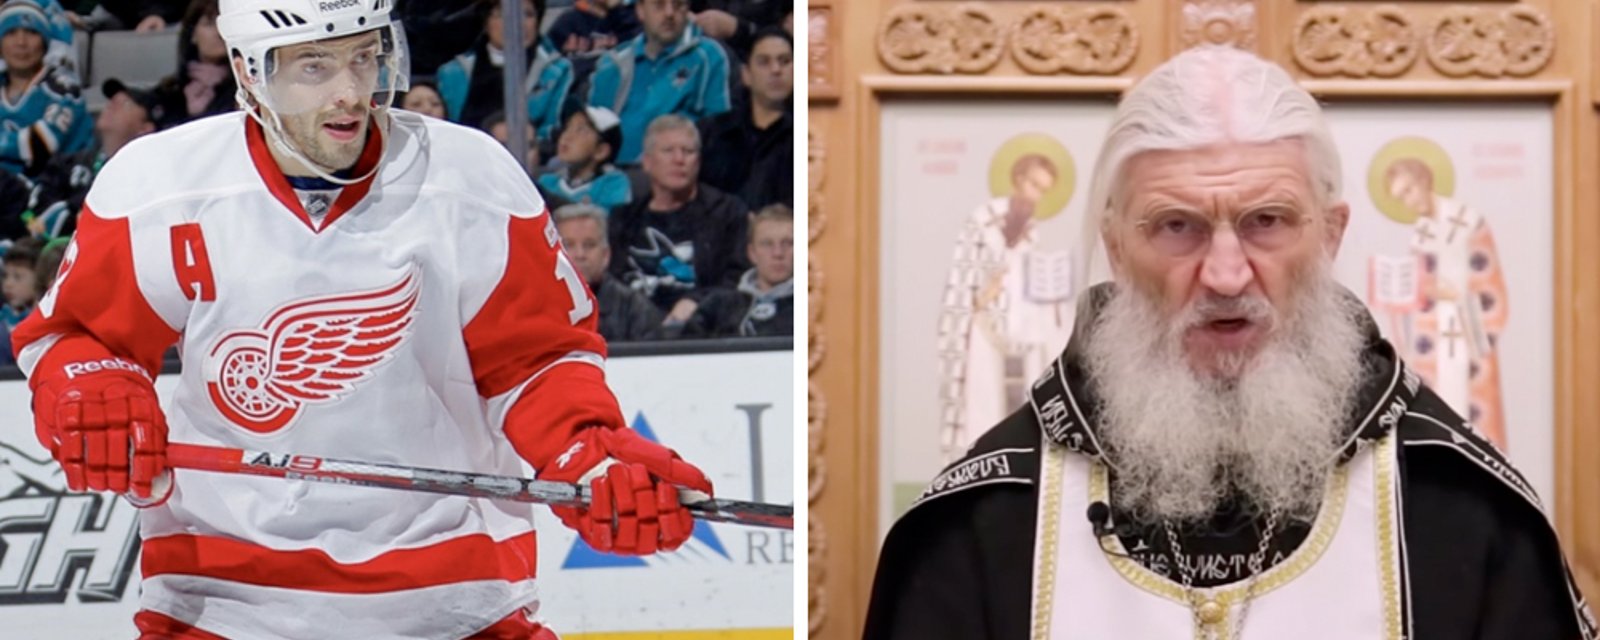 Agent responds after reports that Datsyuk is being held “at a monastery with a priest who claims COVID-19 is a cover-up”  